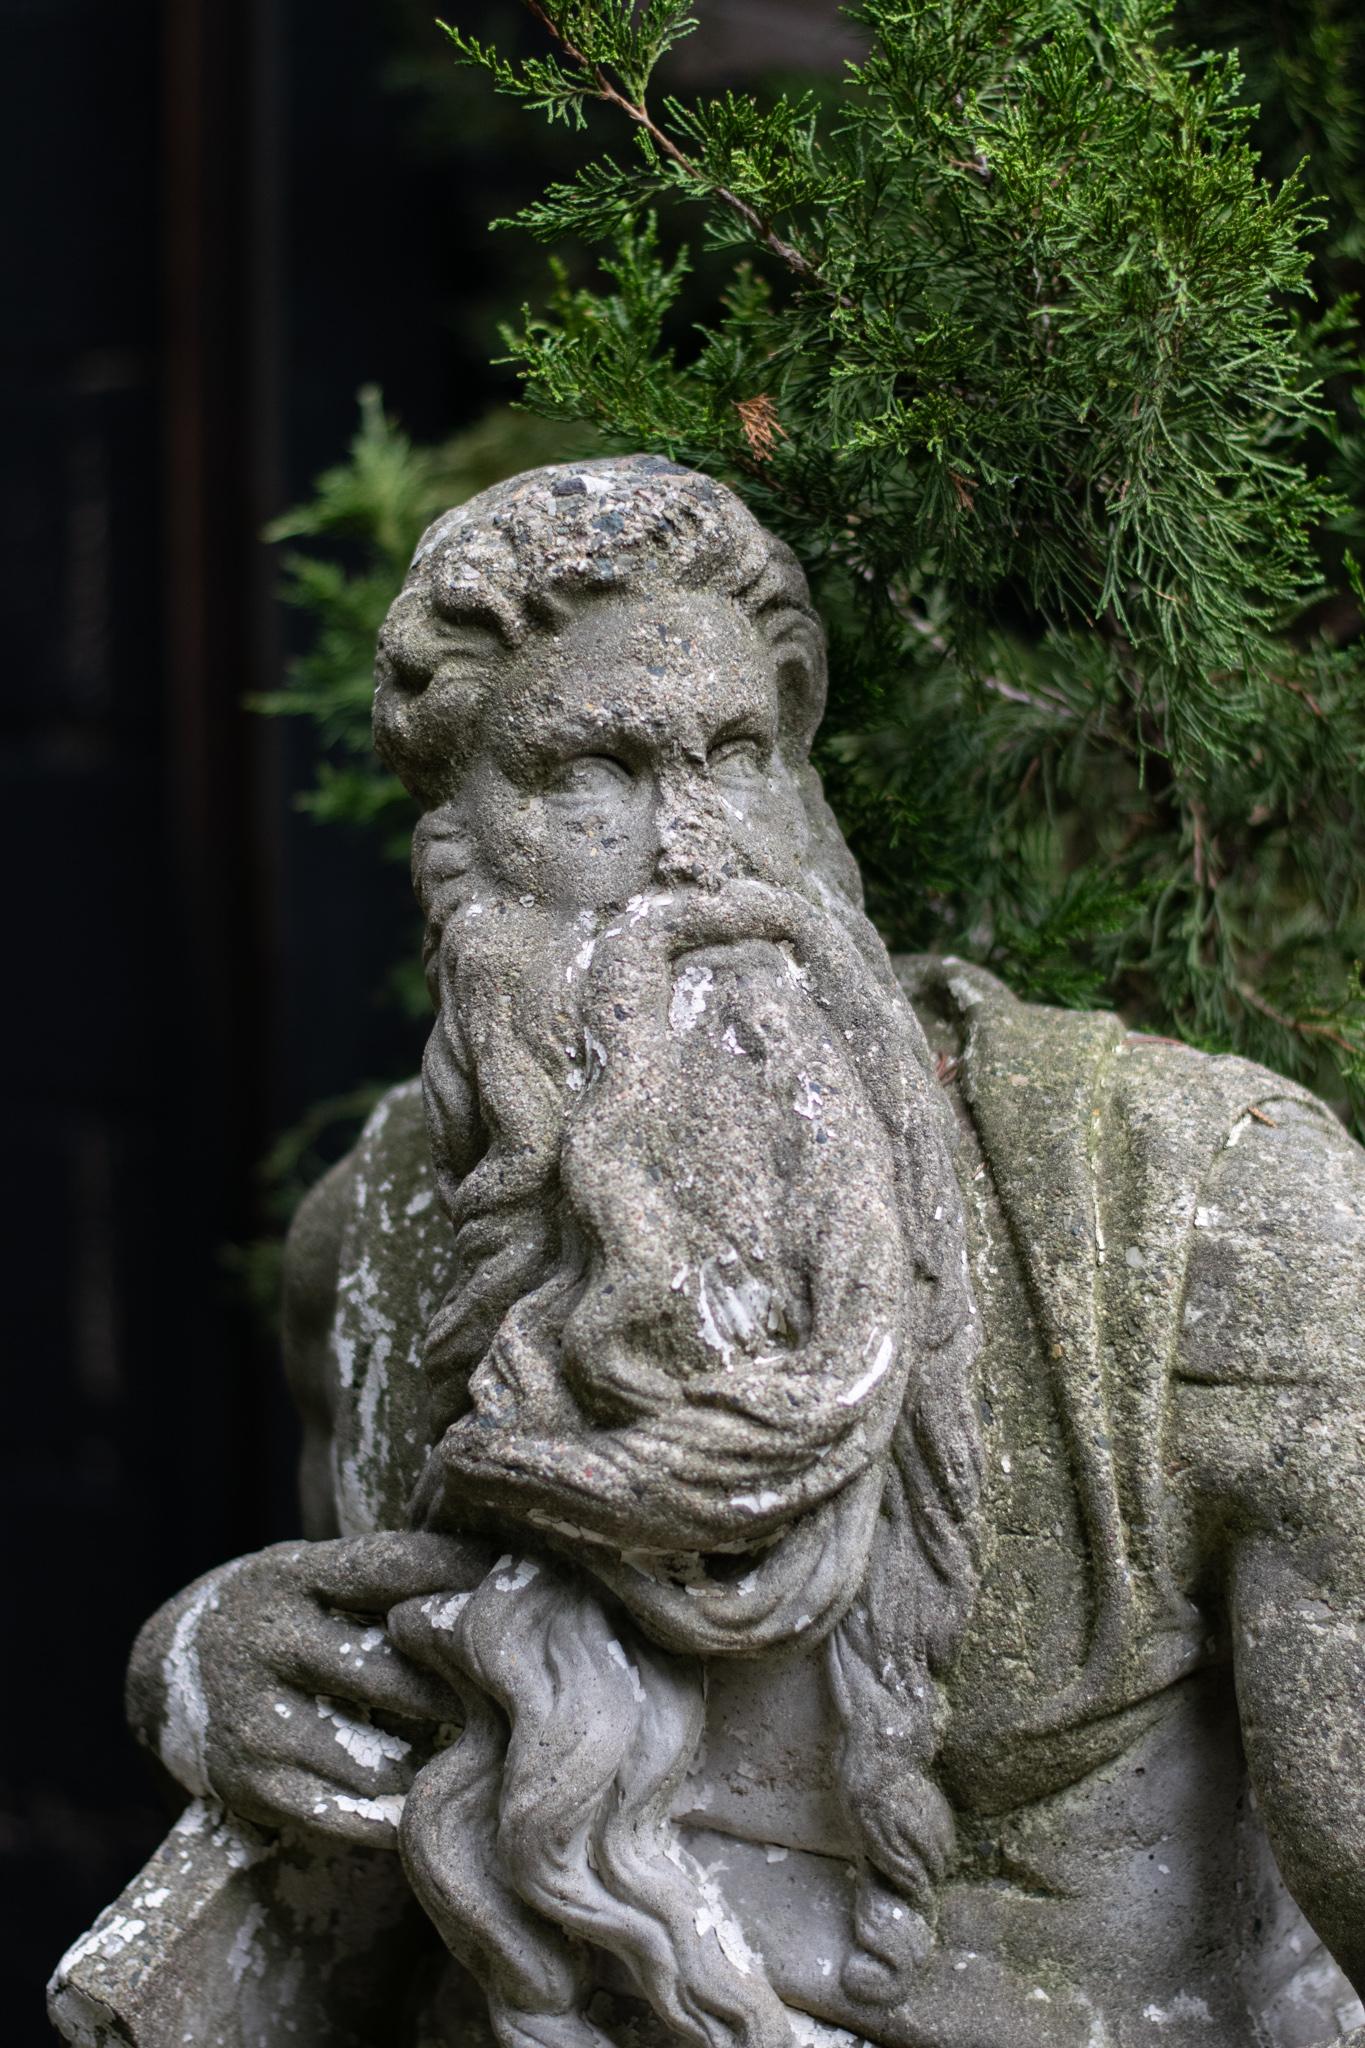 fleurdetroit offers for your consideration this wonderful garden statue of Moses. This likeness of the prophet Moses is an incredible neoclassical garden statue with a lichen encrusted patina. This stately interpretation has a masculine energy that